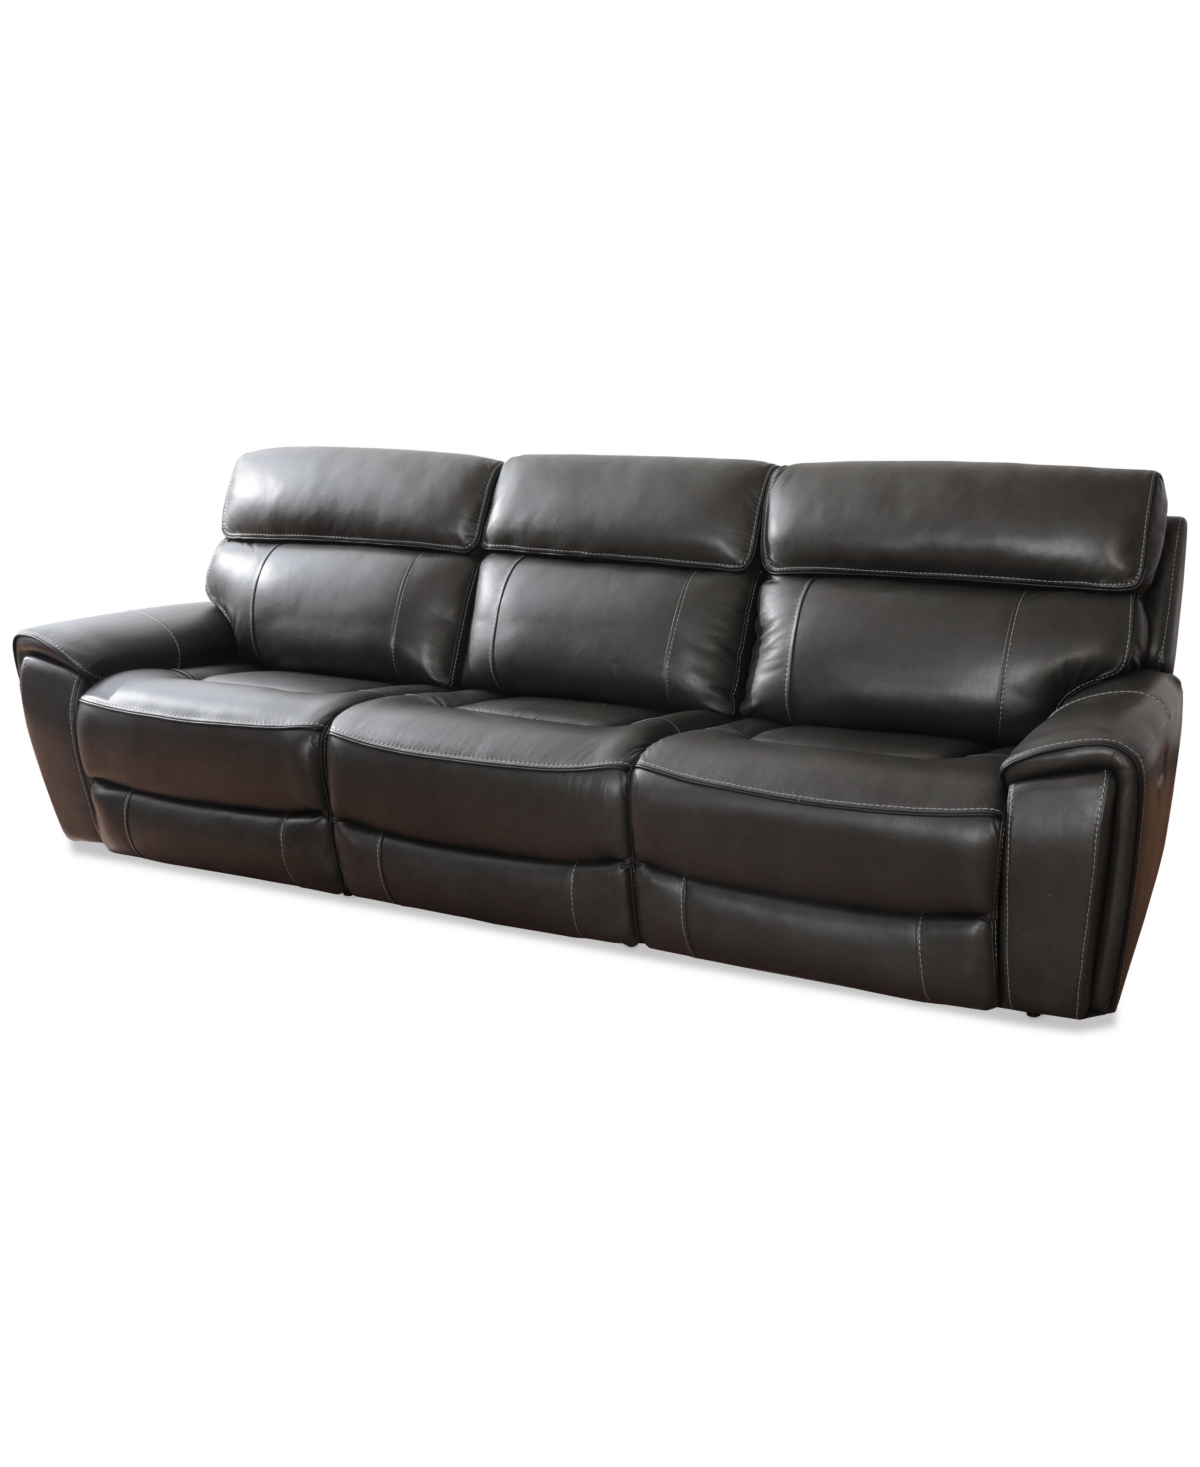 Macy's Hutchenson 115" 3-pc. Zero Gravity Leather Sofa With 3 Power Recliners, Created For  In Grey